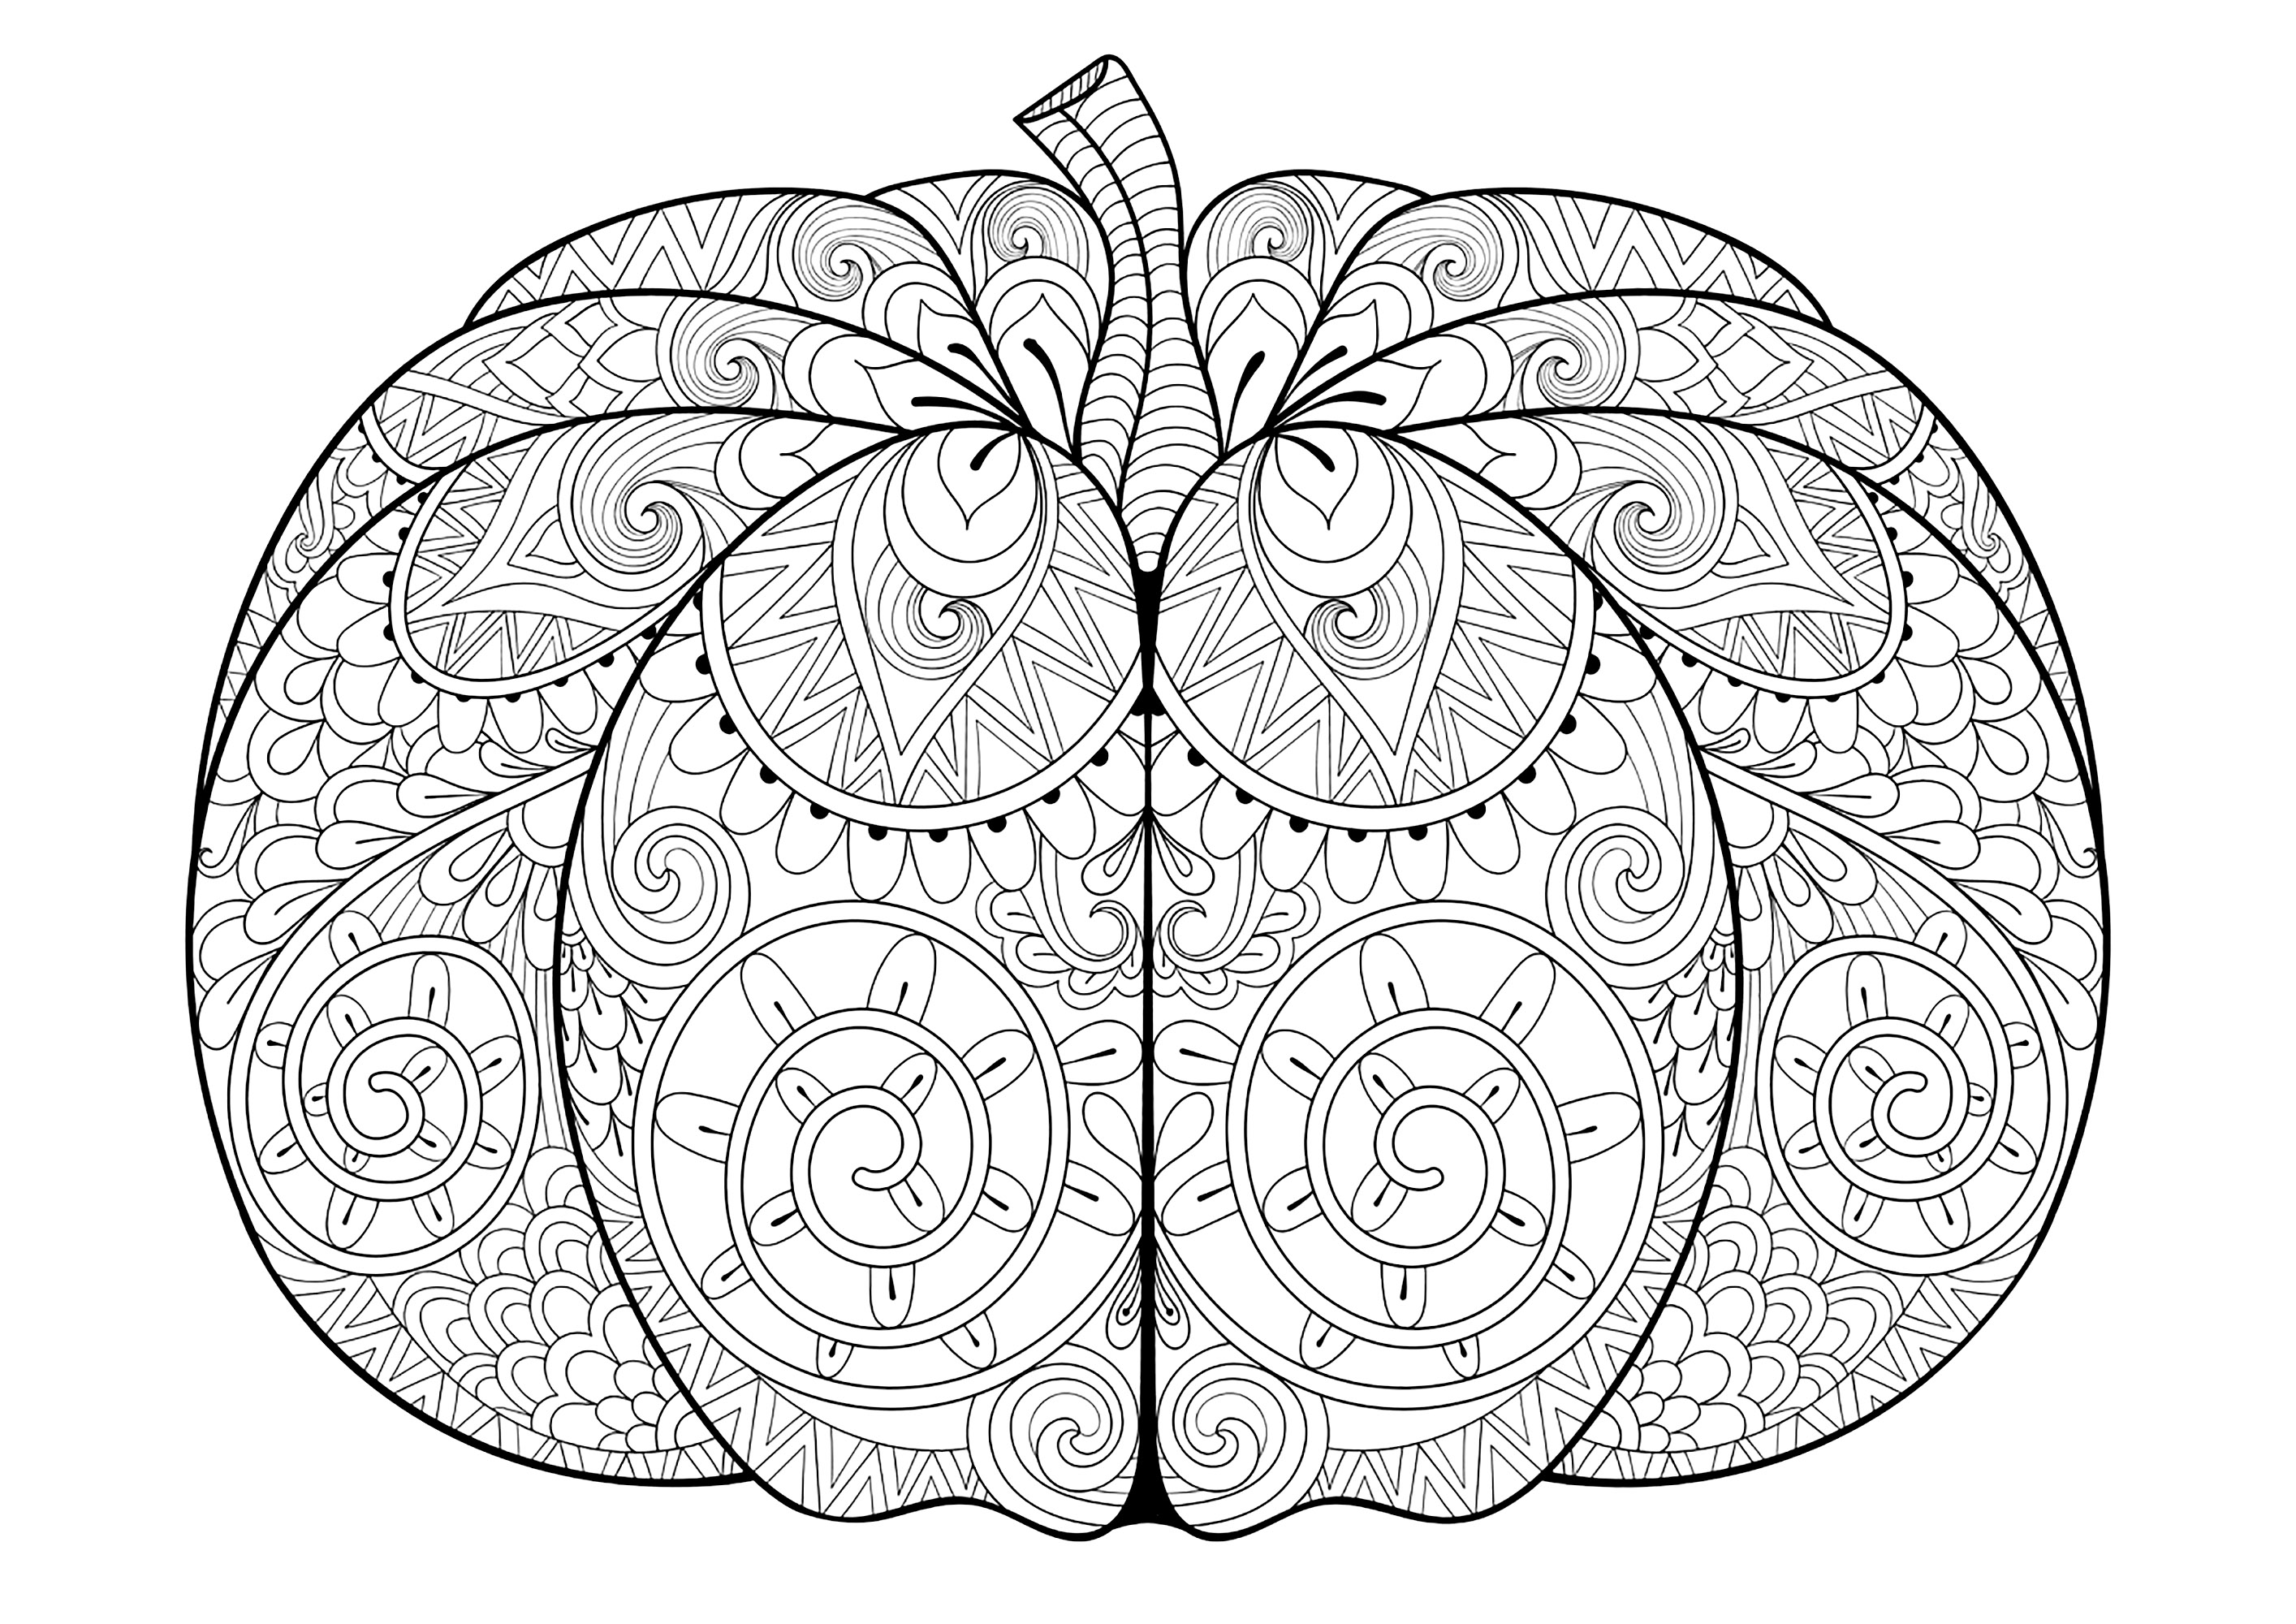 Large Halloween pumpkin. Color all the intricate and varied pumpkin patterns, Source : 123rf   Artist : Ipanki